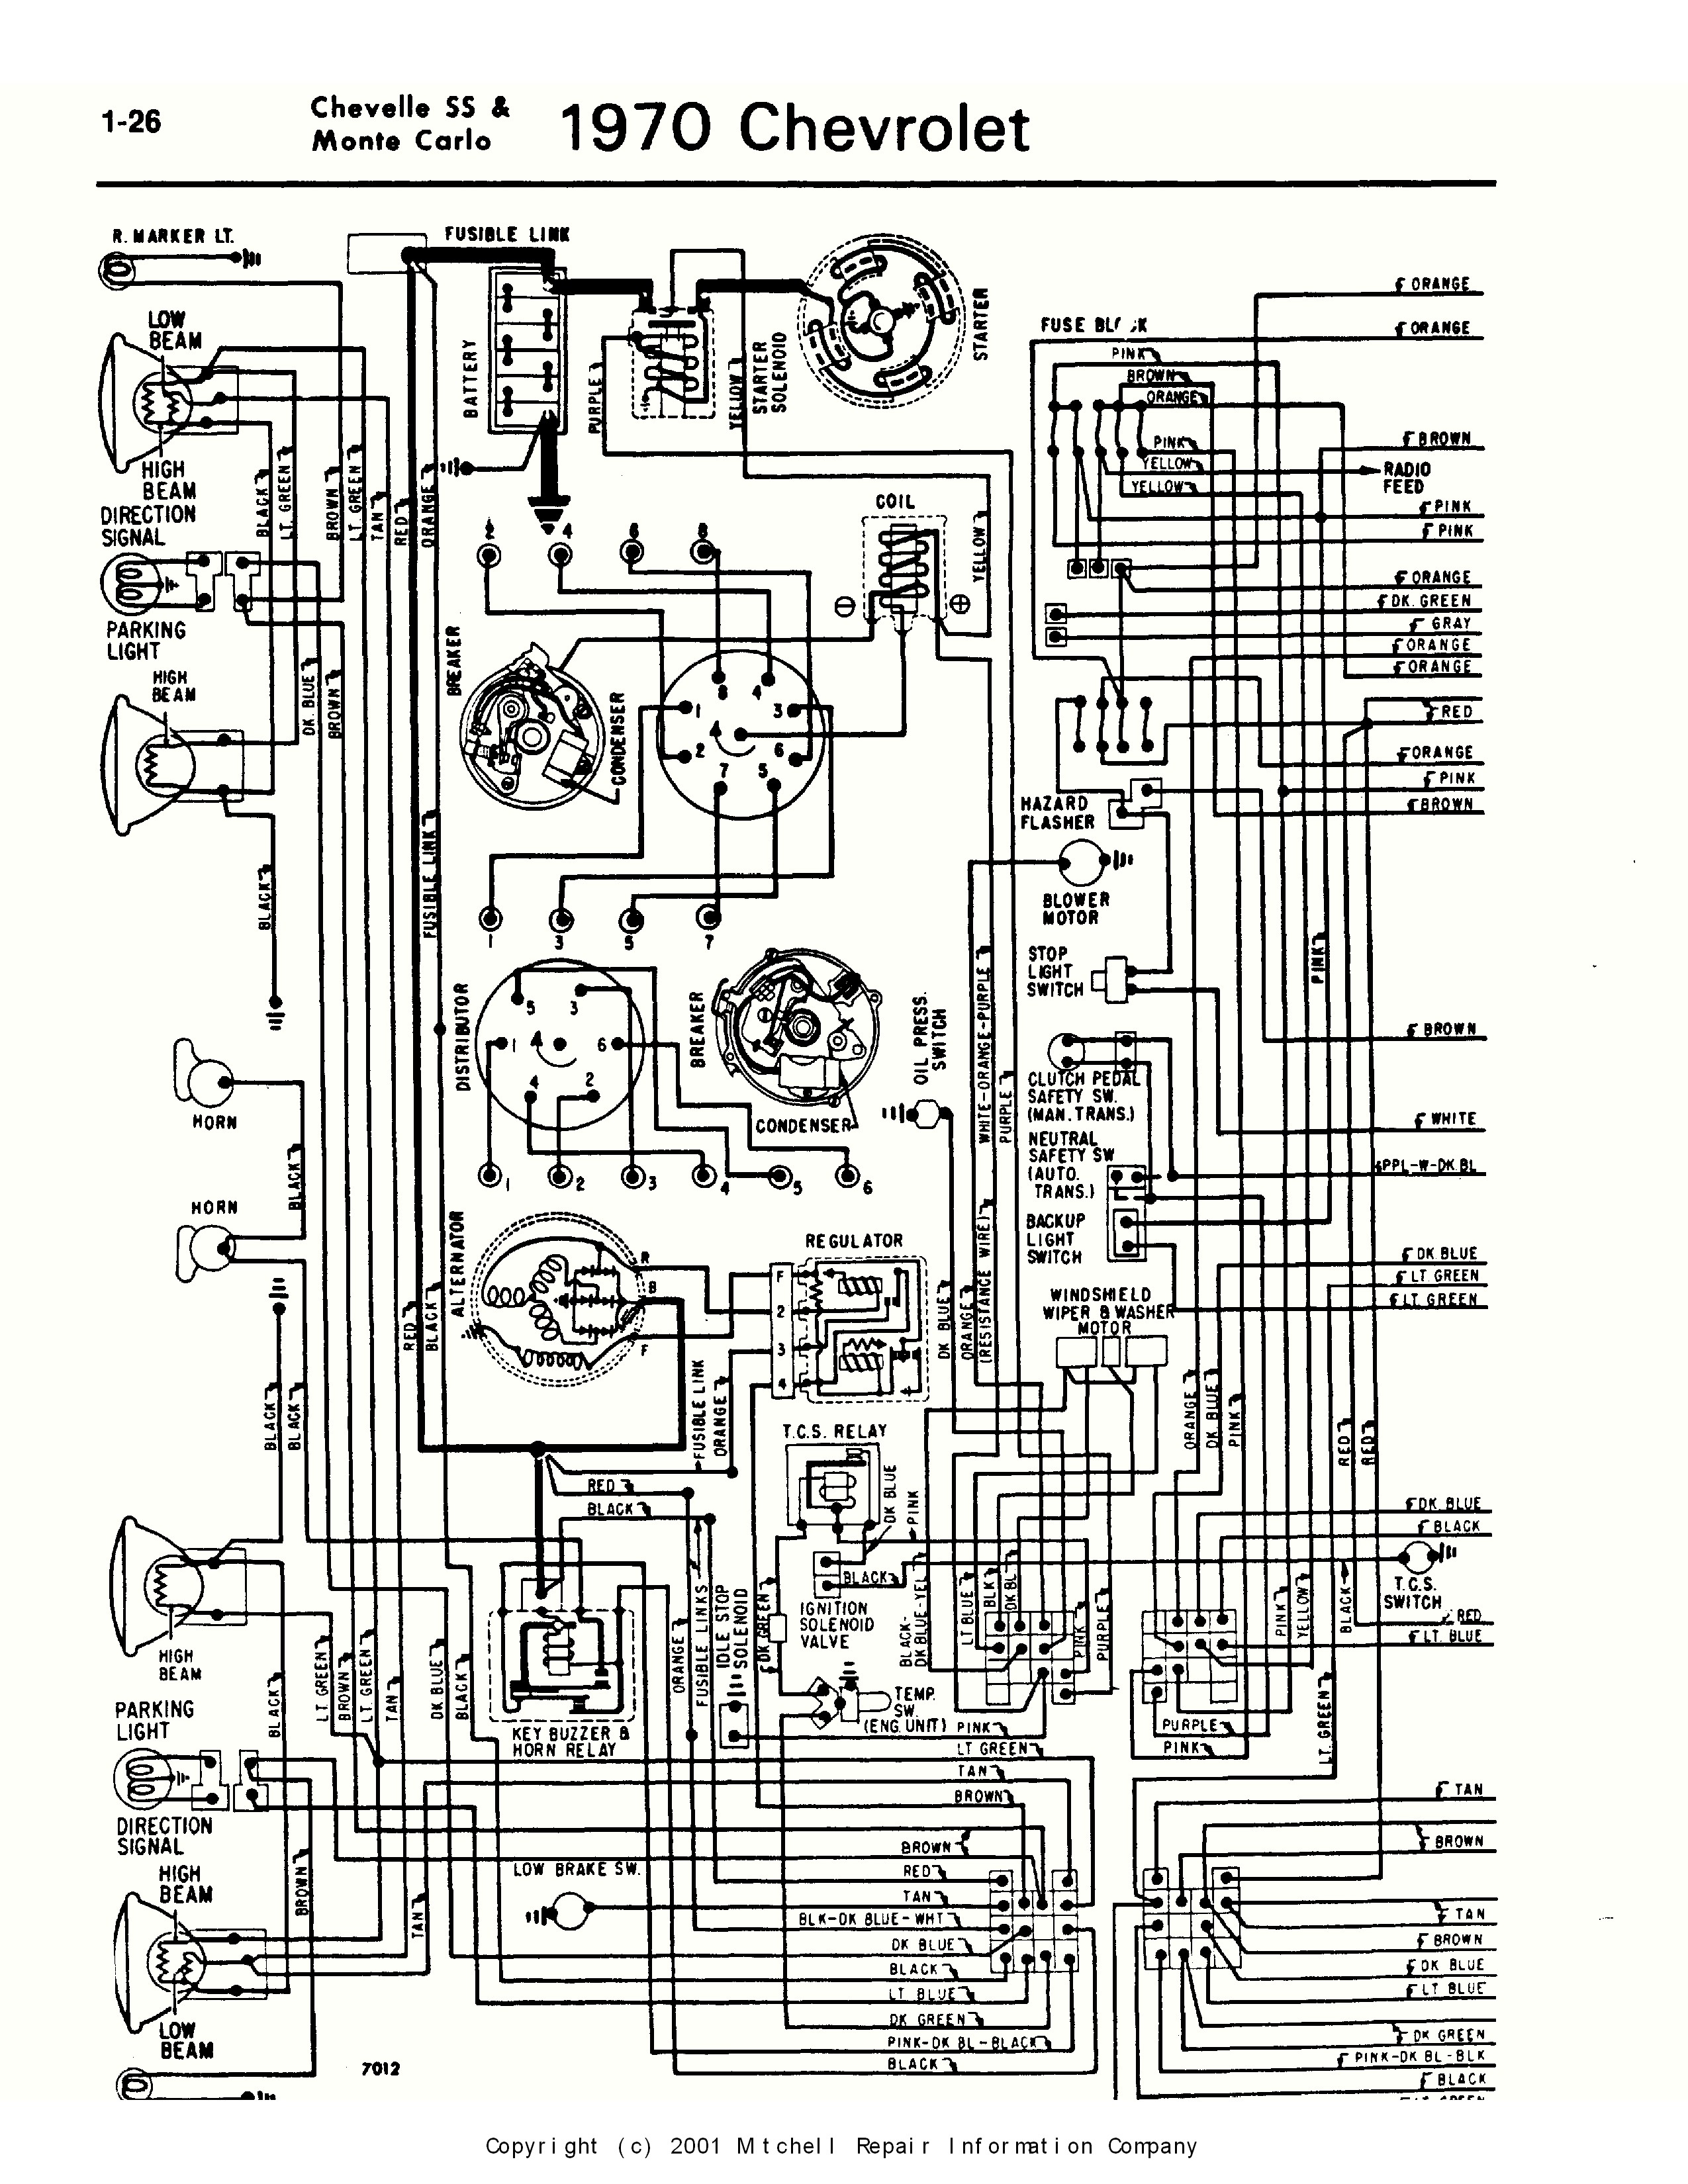 1968 Chevelle Wiring Diagram 72 Chevelle Wiring Harness Ac Free Download Wiring Diagrams